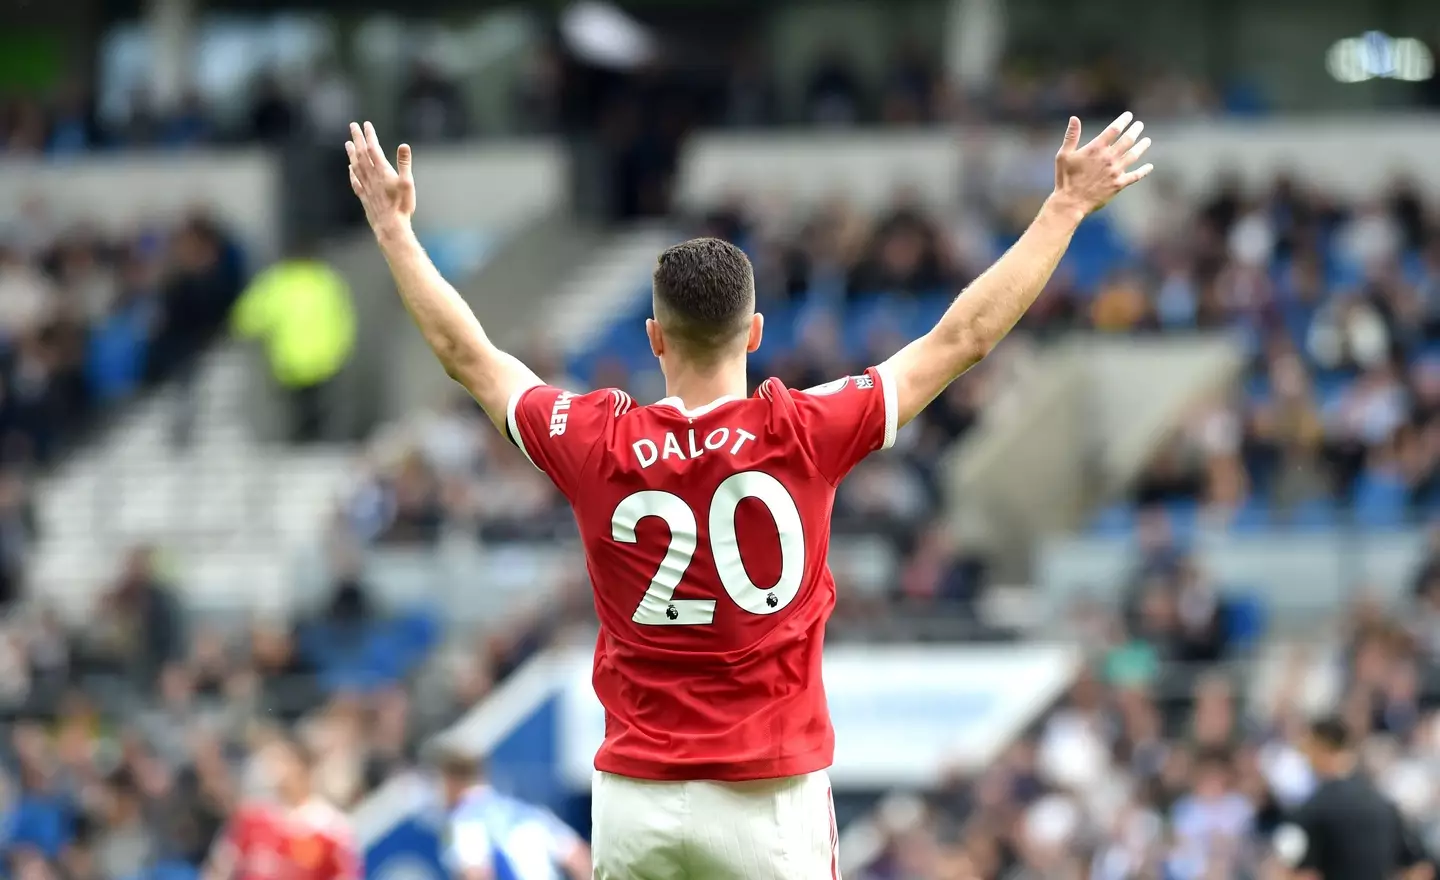 Dalot could be ahead of the out of favour Aaron Wan-Bissaka